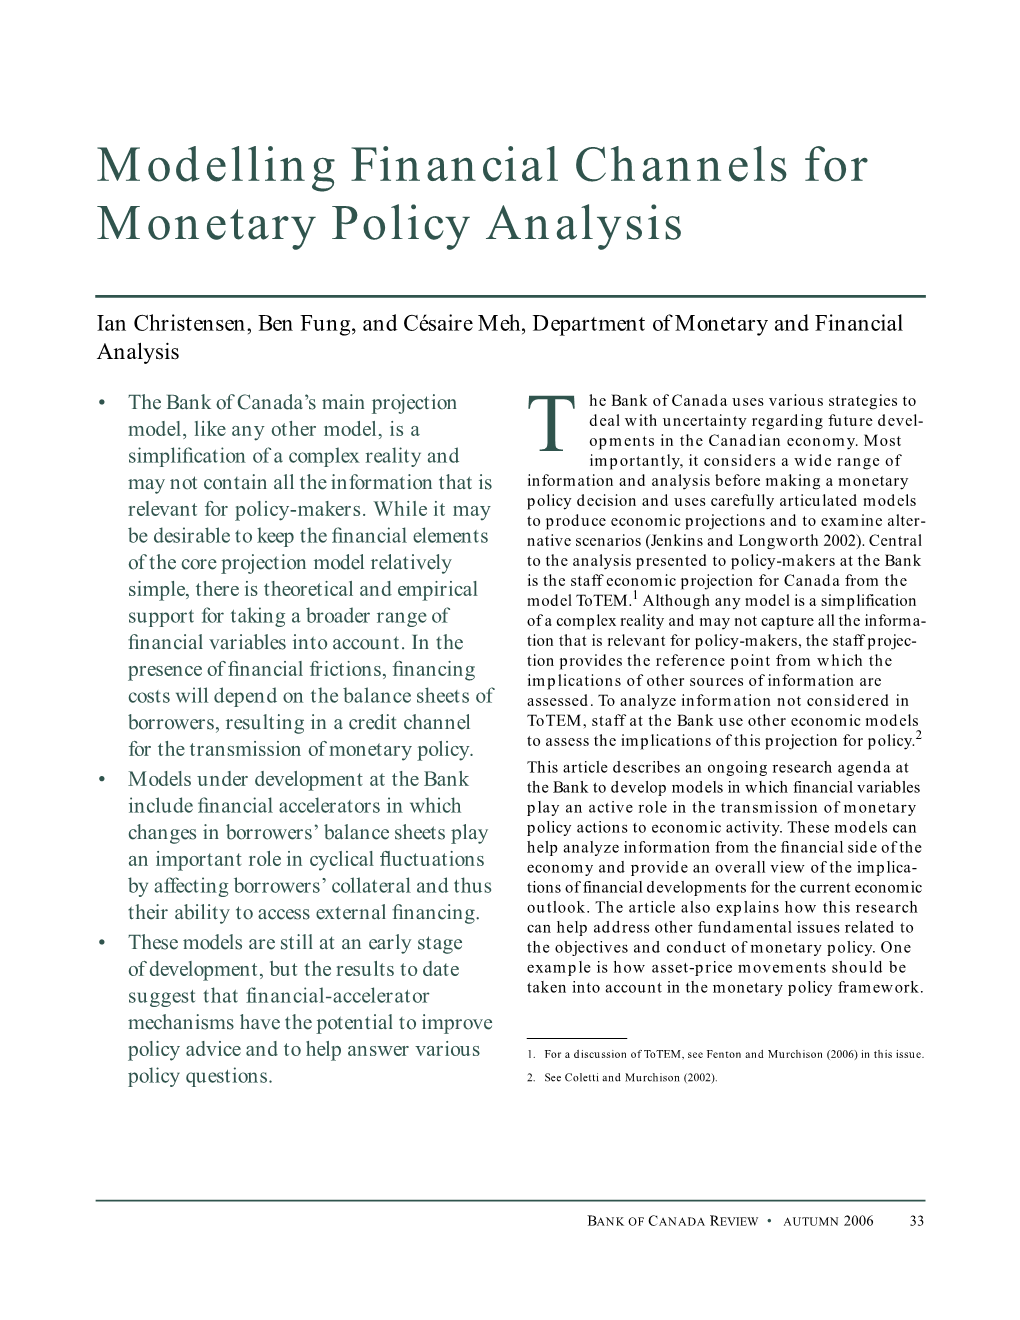 Modelling Financial Channels for Monetary Policy Analysis